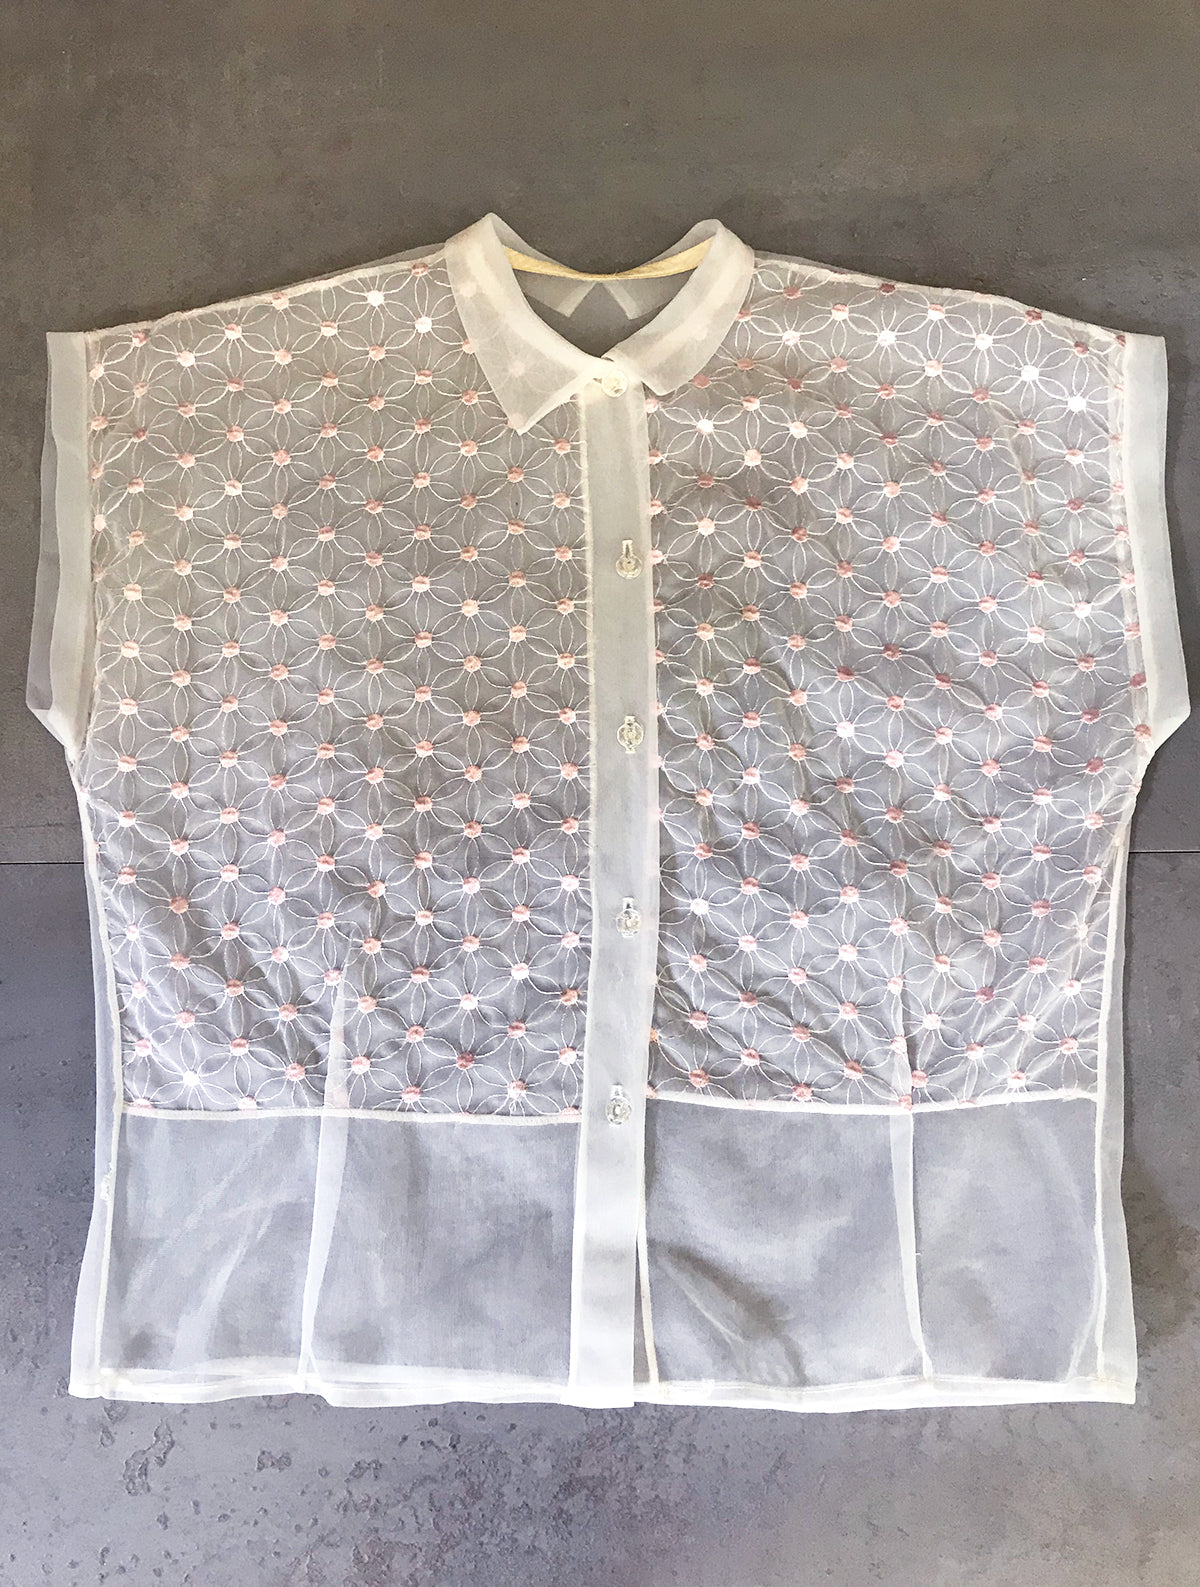 1950s Sheer White Nylon Blouse w Pink Embroidered Flower Dots